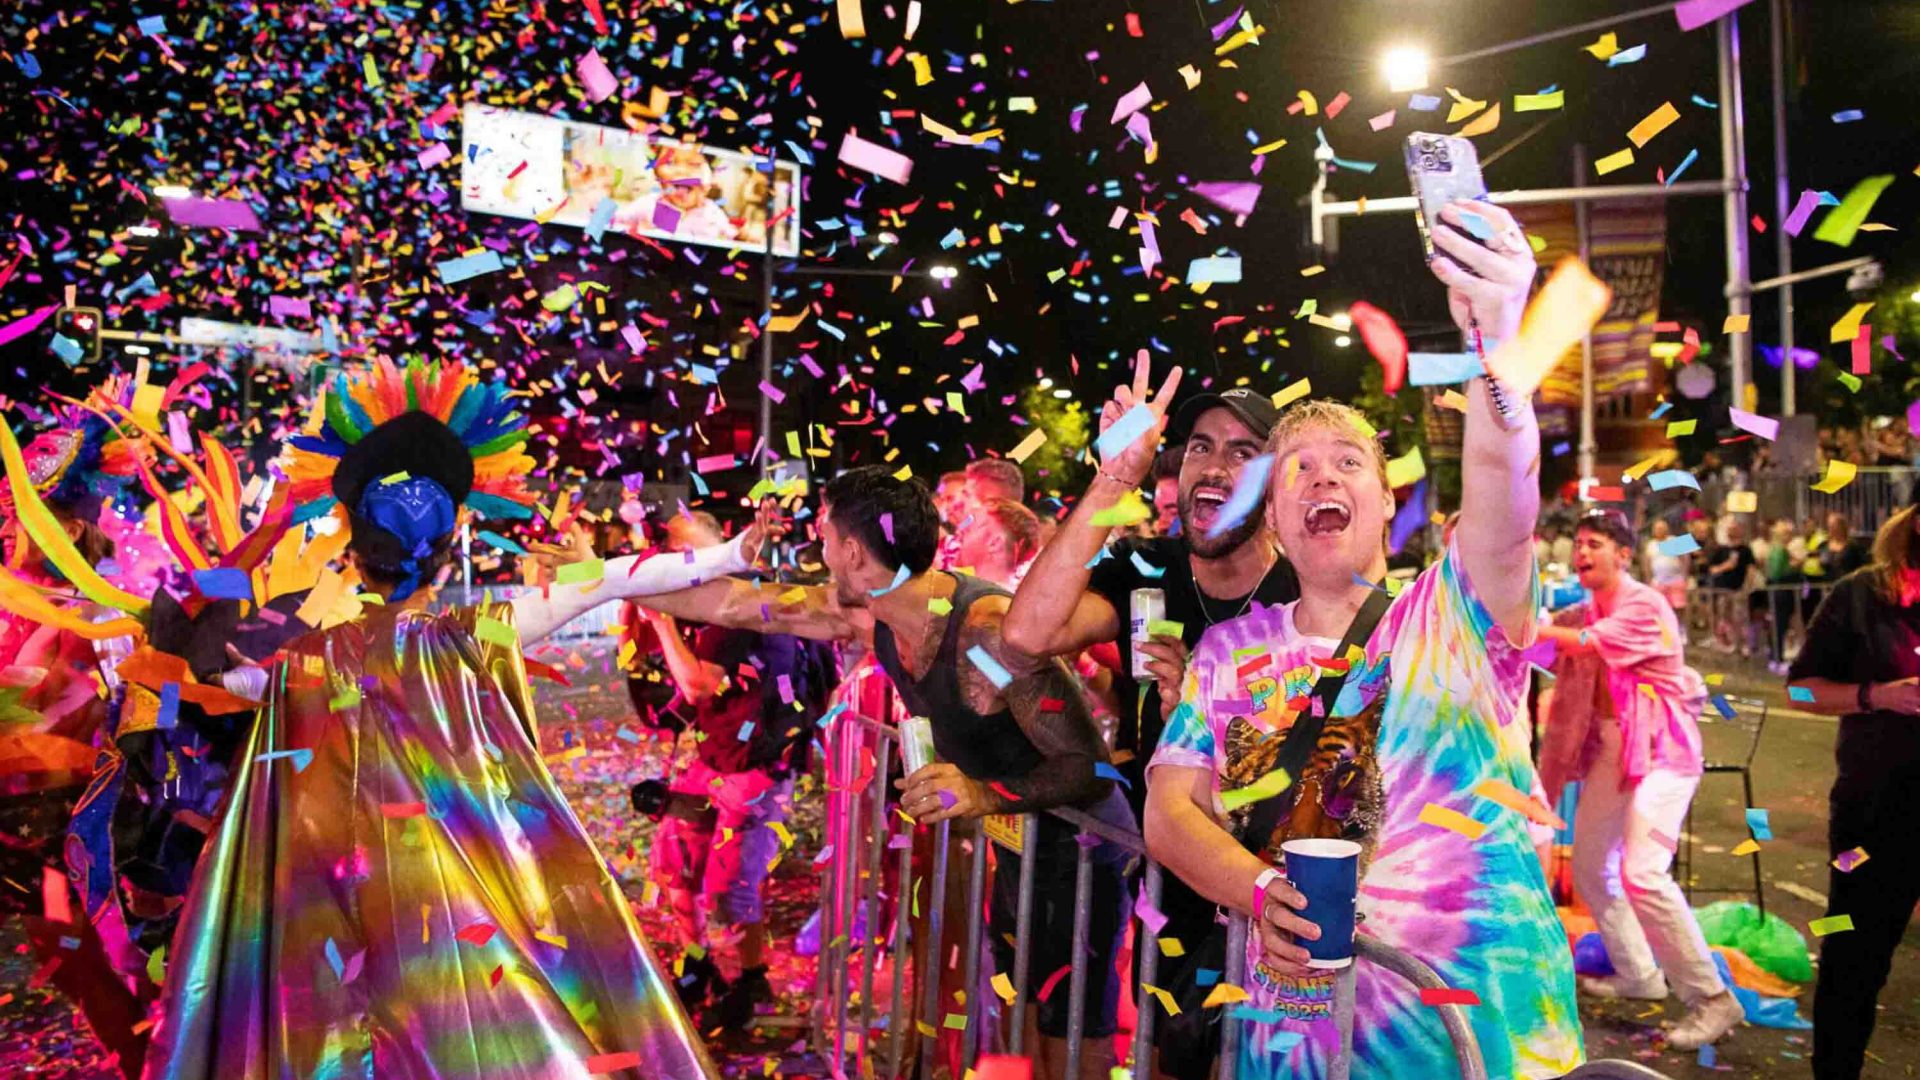 People cheer amongst confetti as the Mardi Gras Parade passes by.